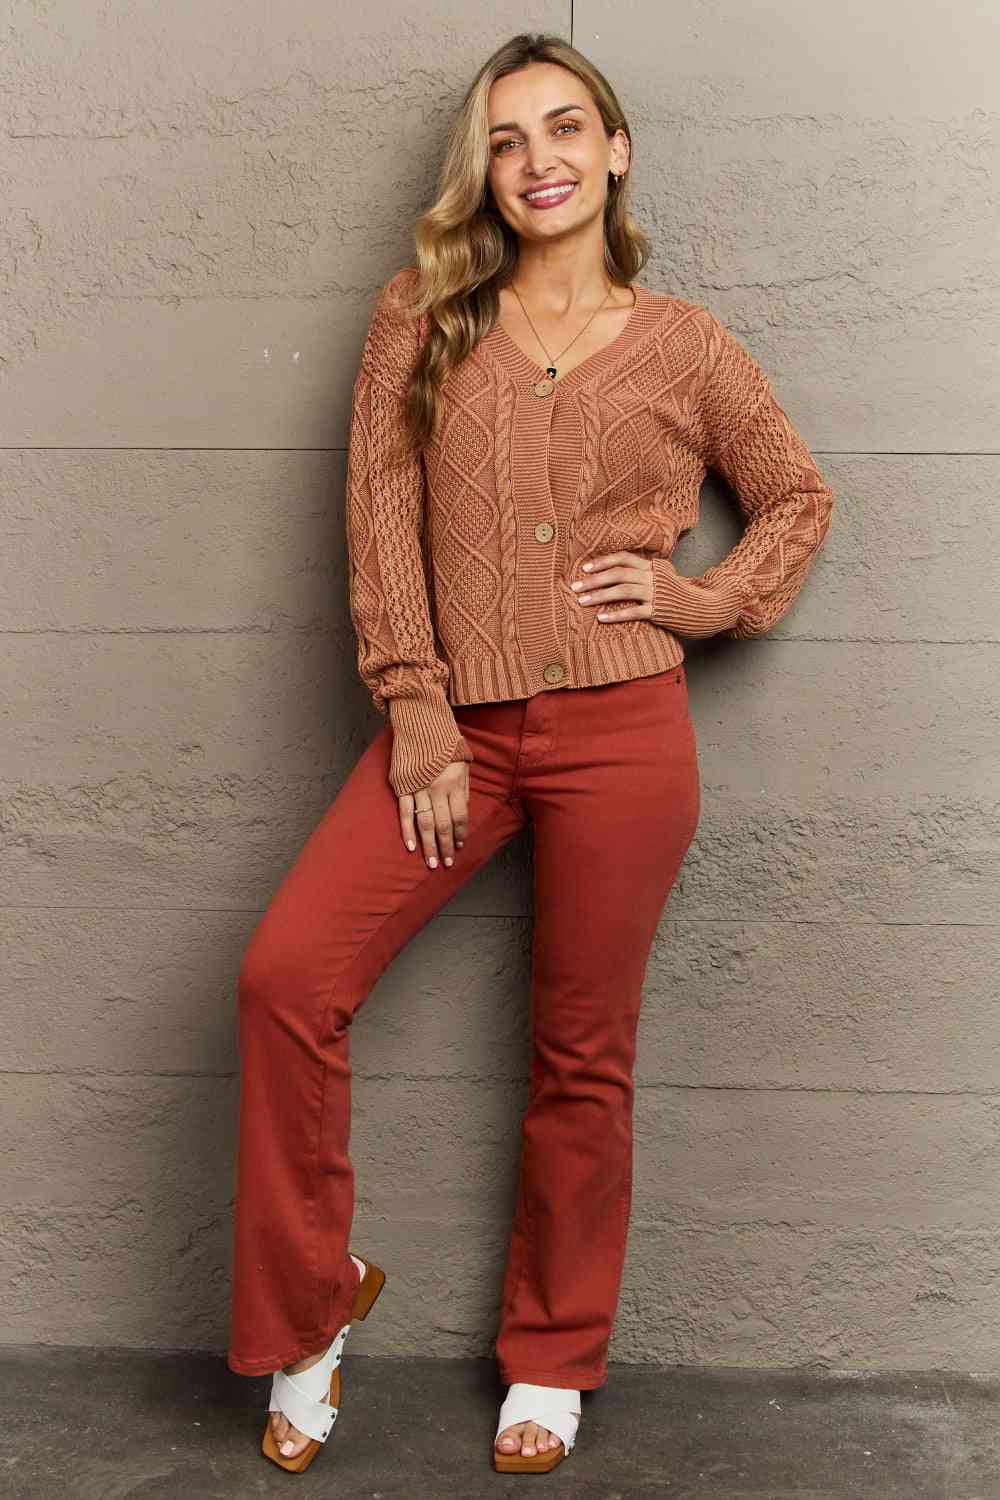 Orangey Red Cable Knit Cardigan